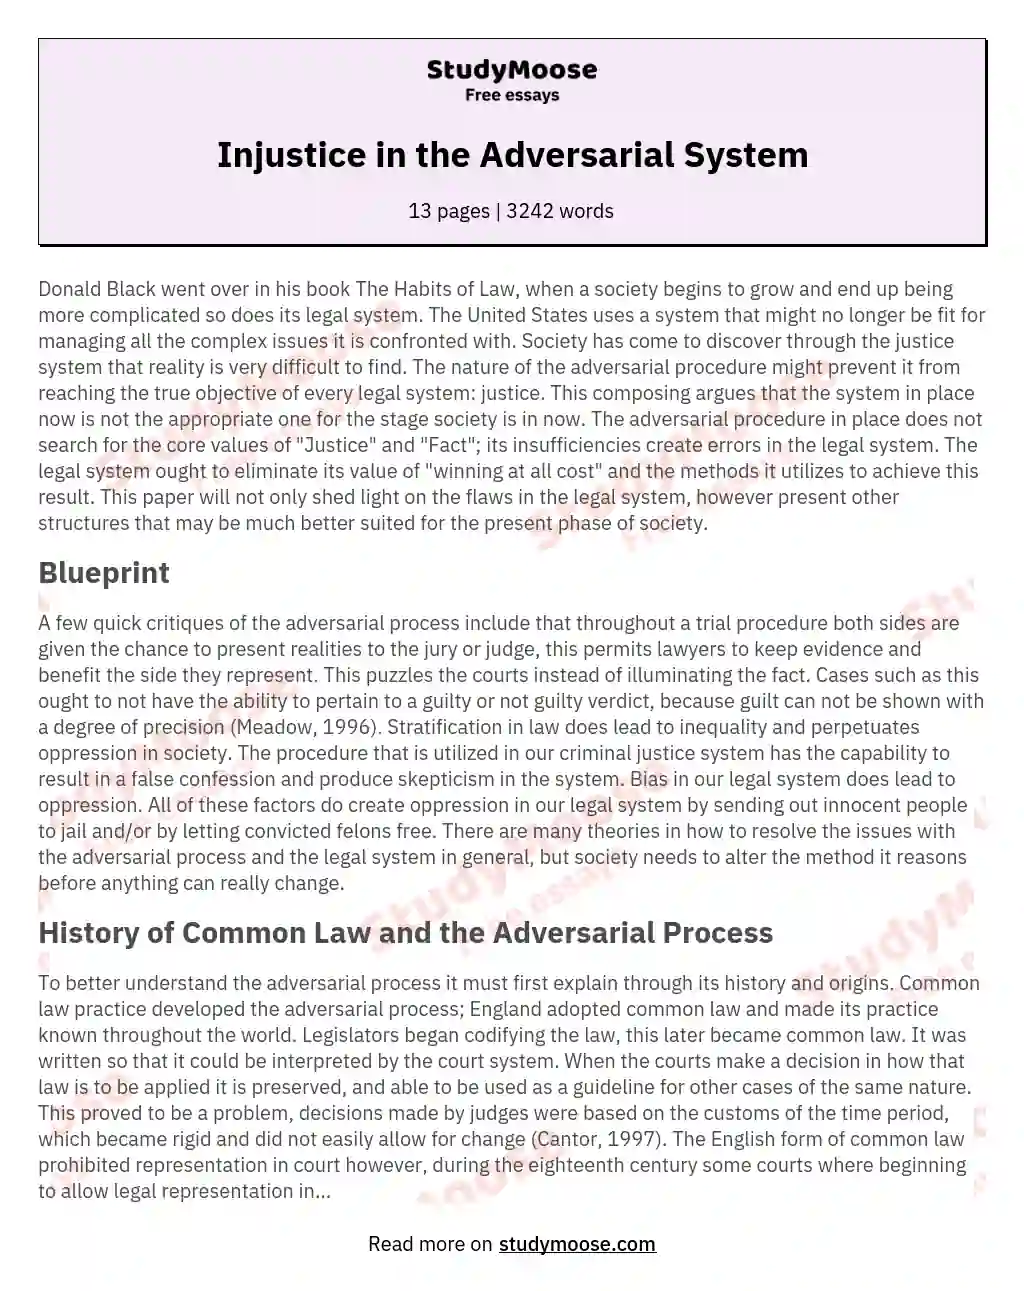 Injustice in the Adversarial System essay